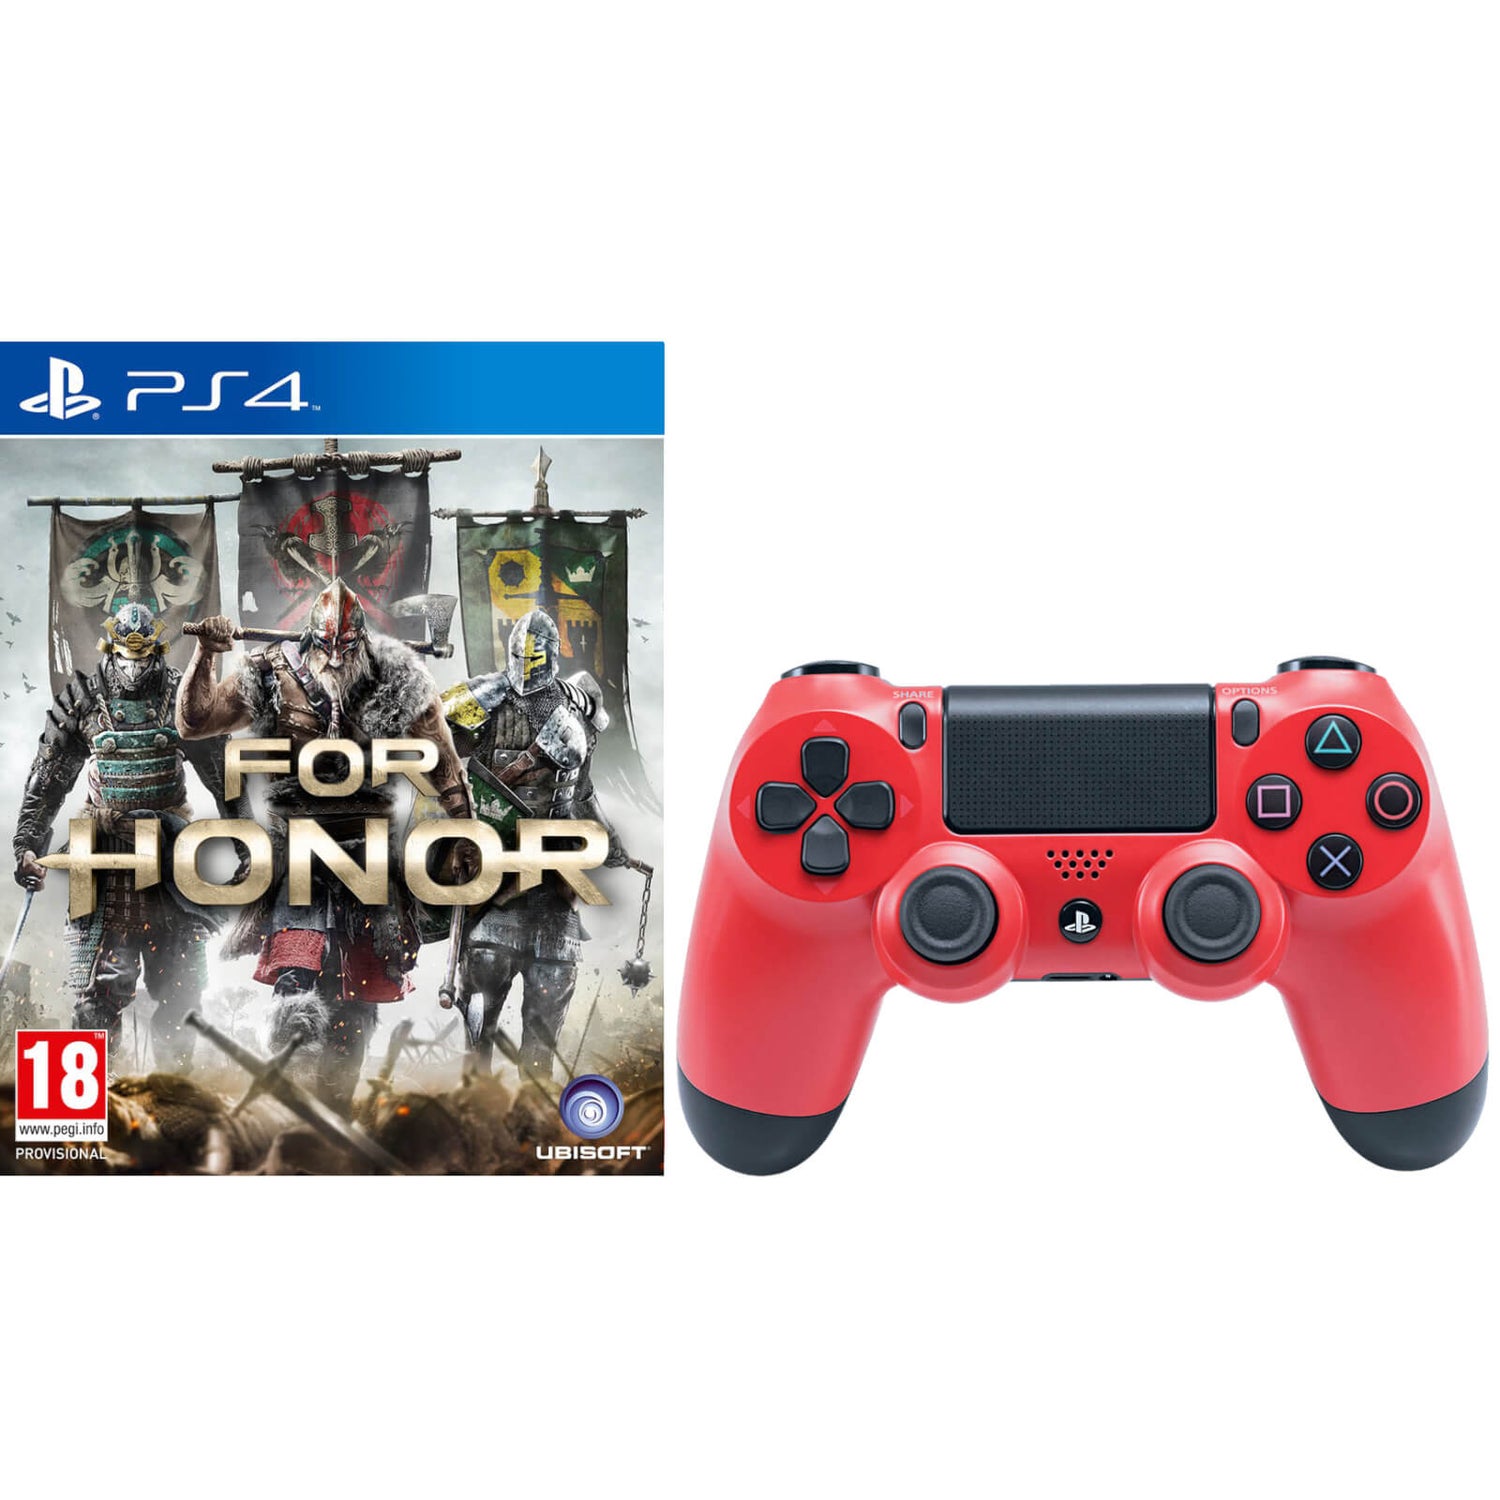 For Honor V2 US Games Sony 4 Zavvi Controller Accessories Red with PlayStation - DualShock 4